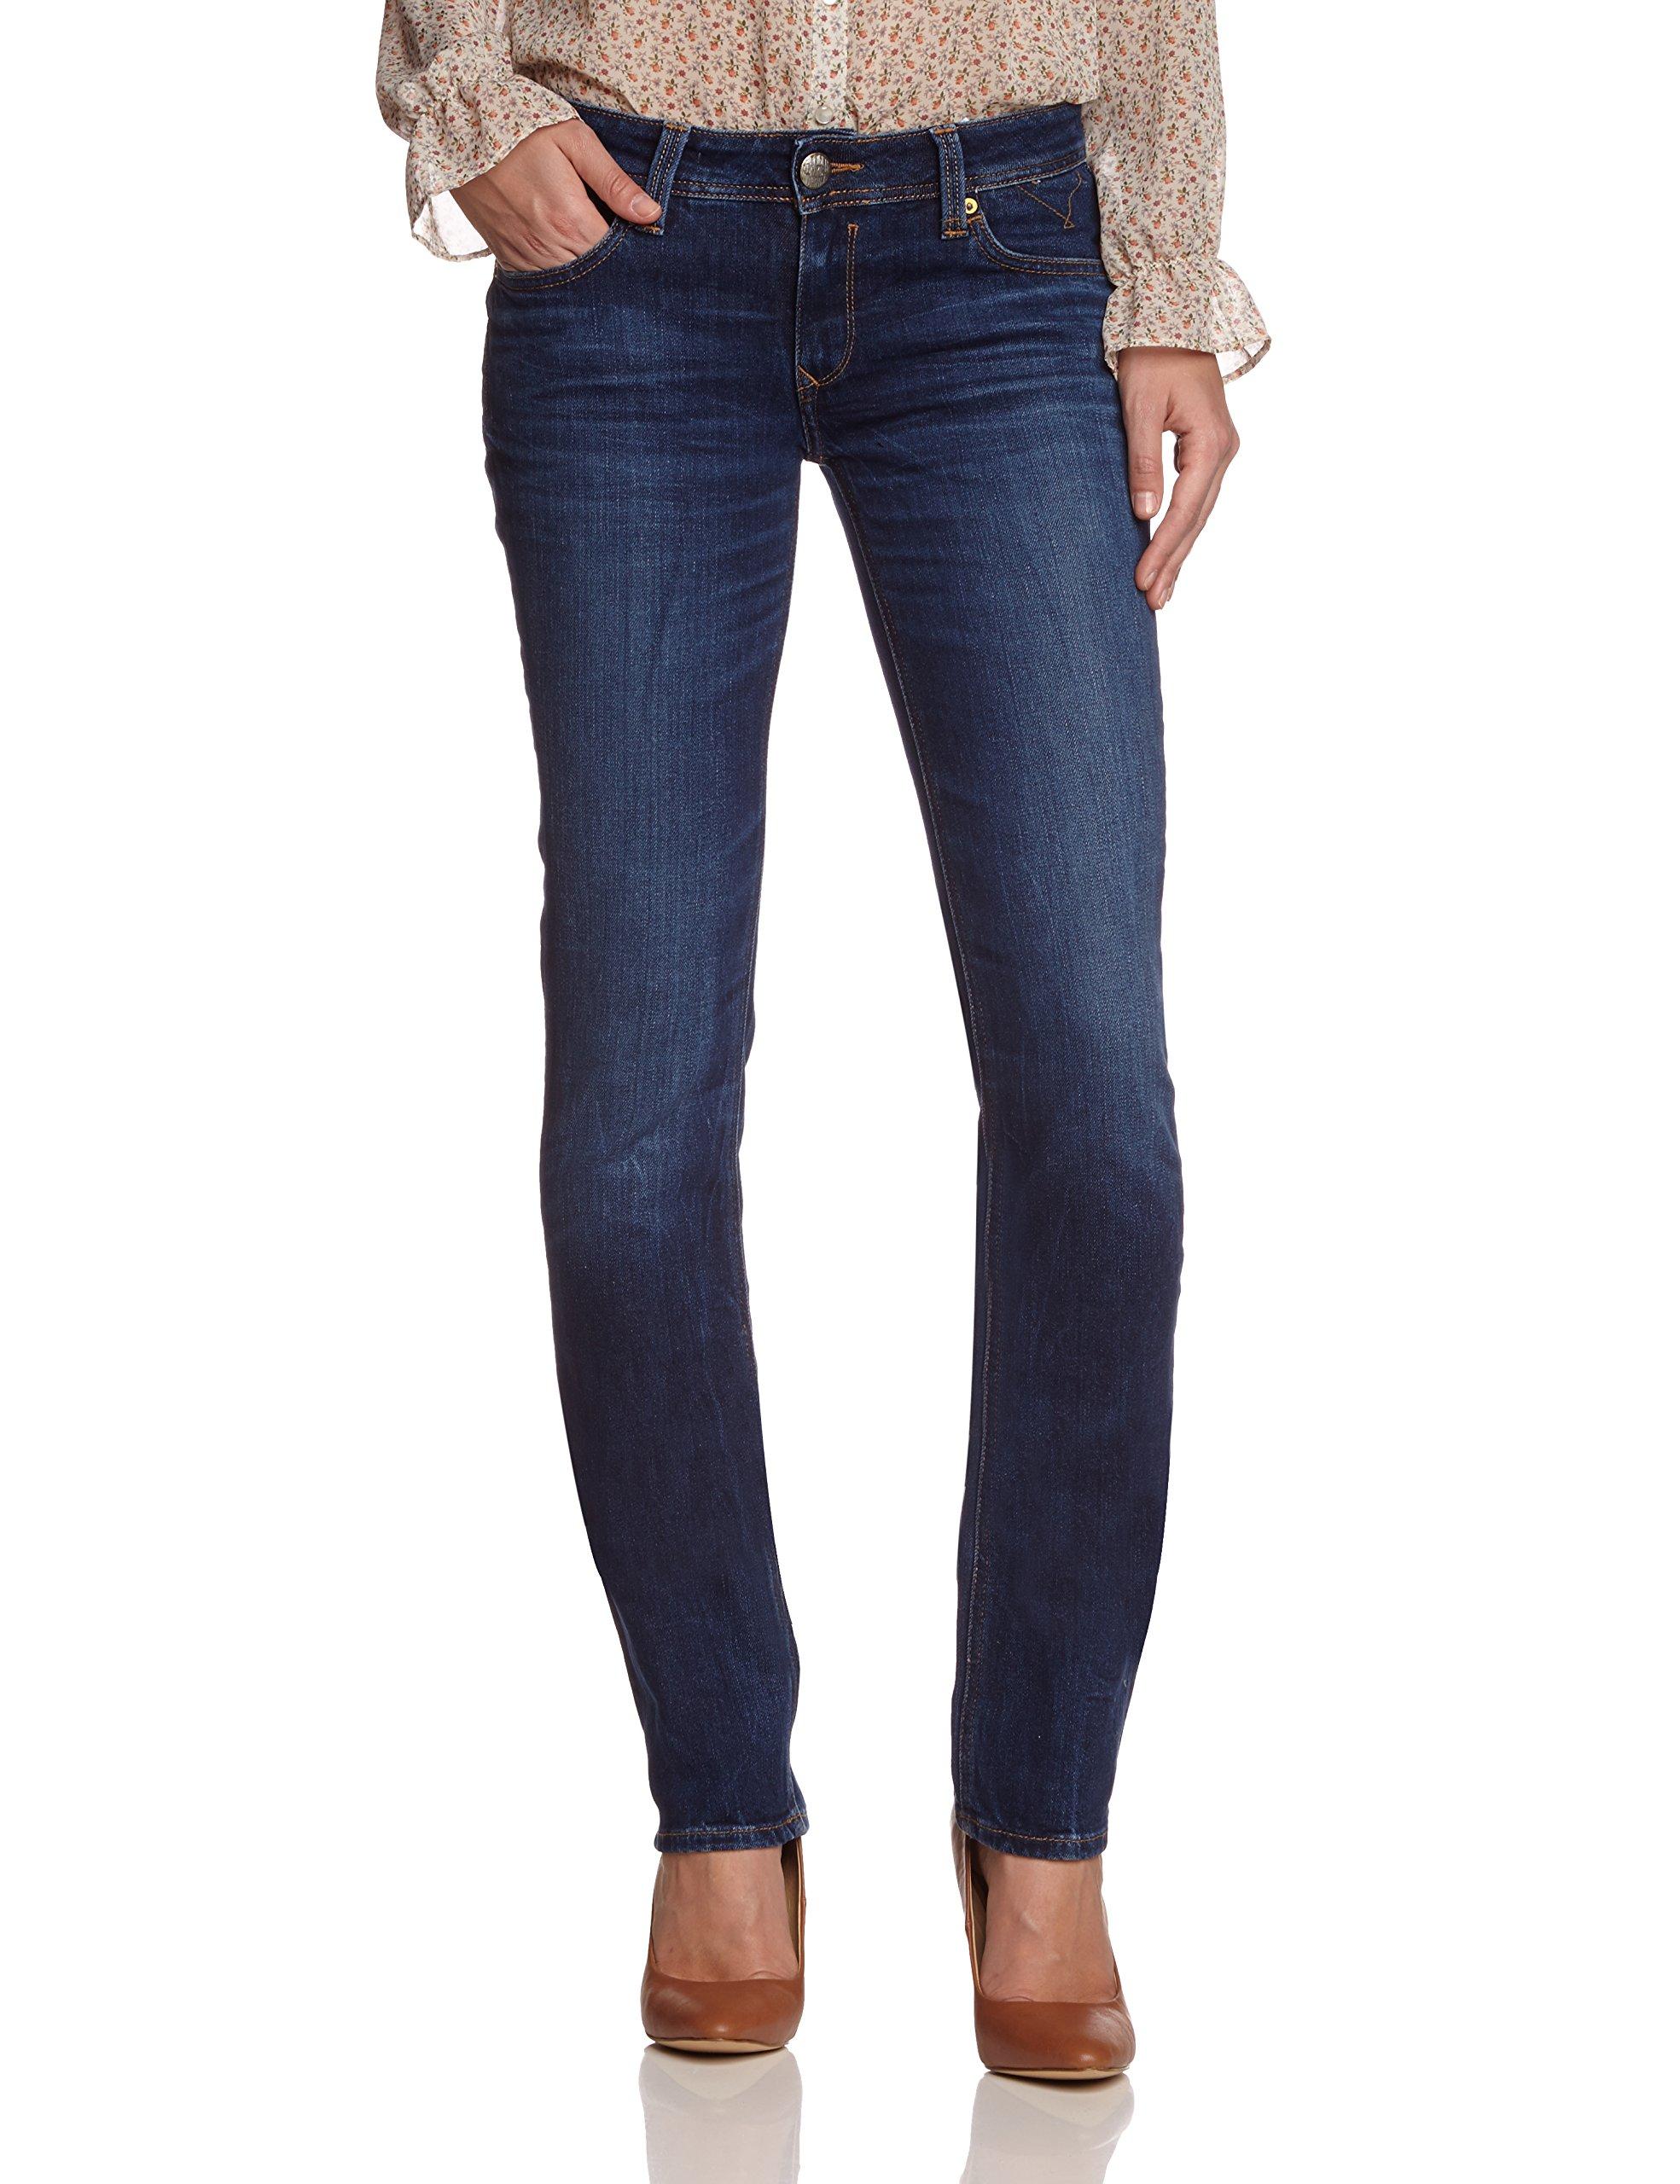 Tommy Hilfiger Suzzy Jeans Discount Compare, 53% OFF | lahuelladigital.com